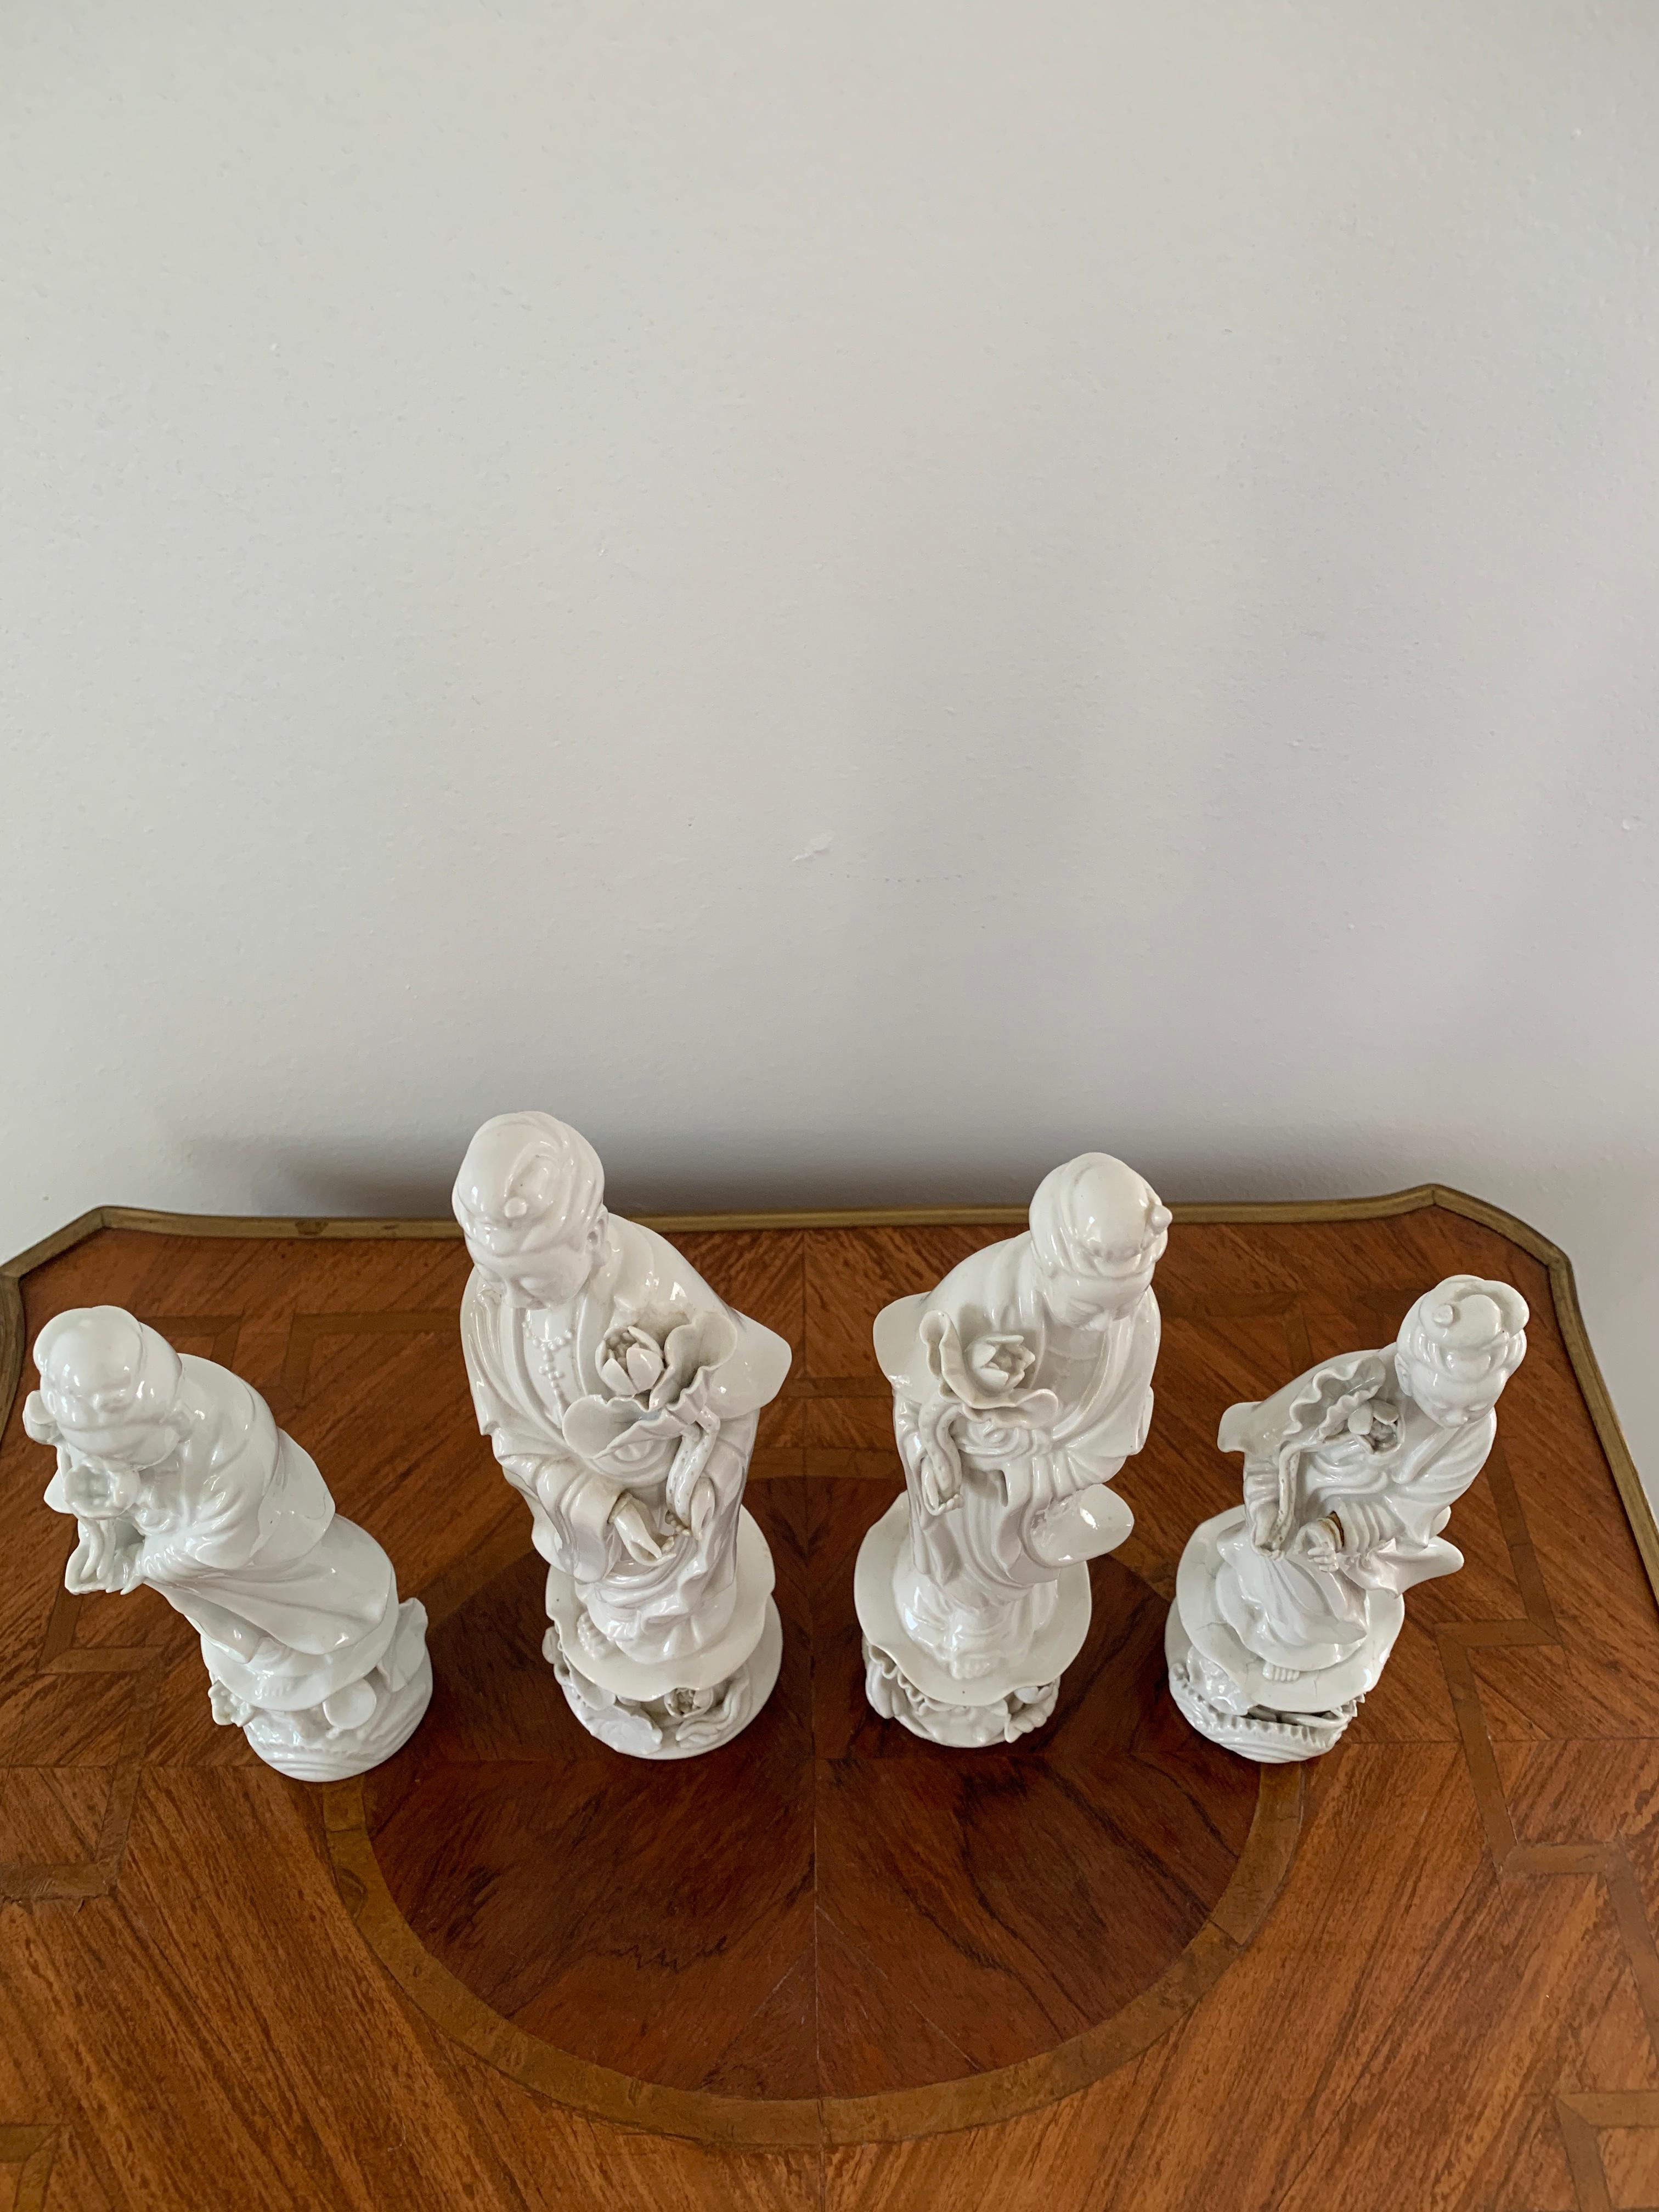 Mid 20th Century Vintage Blanc De Chine Figures - Set of 4 In Good Condition For Sale In Elkhart, IN